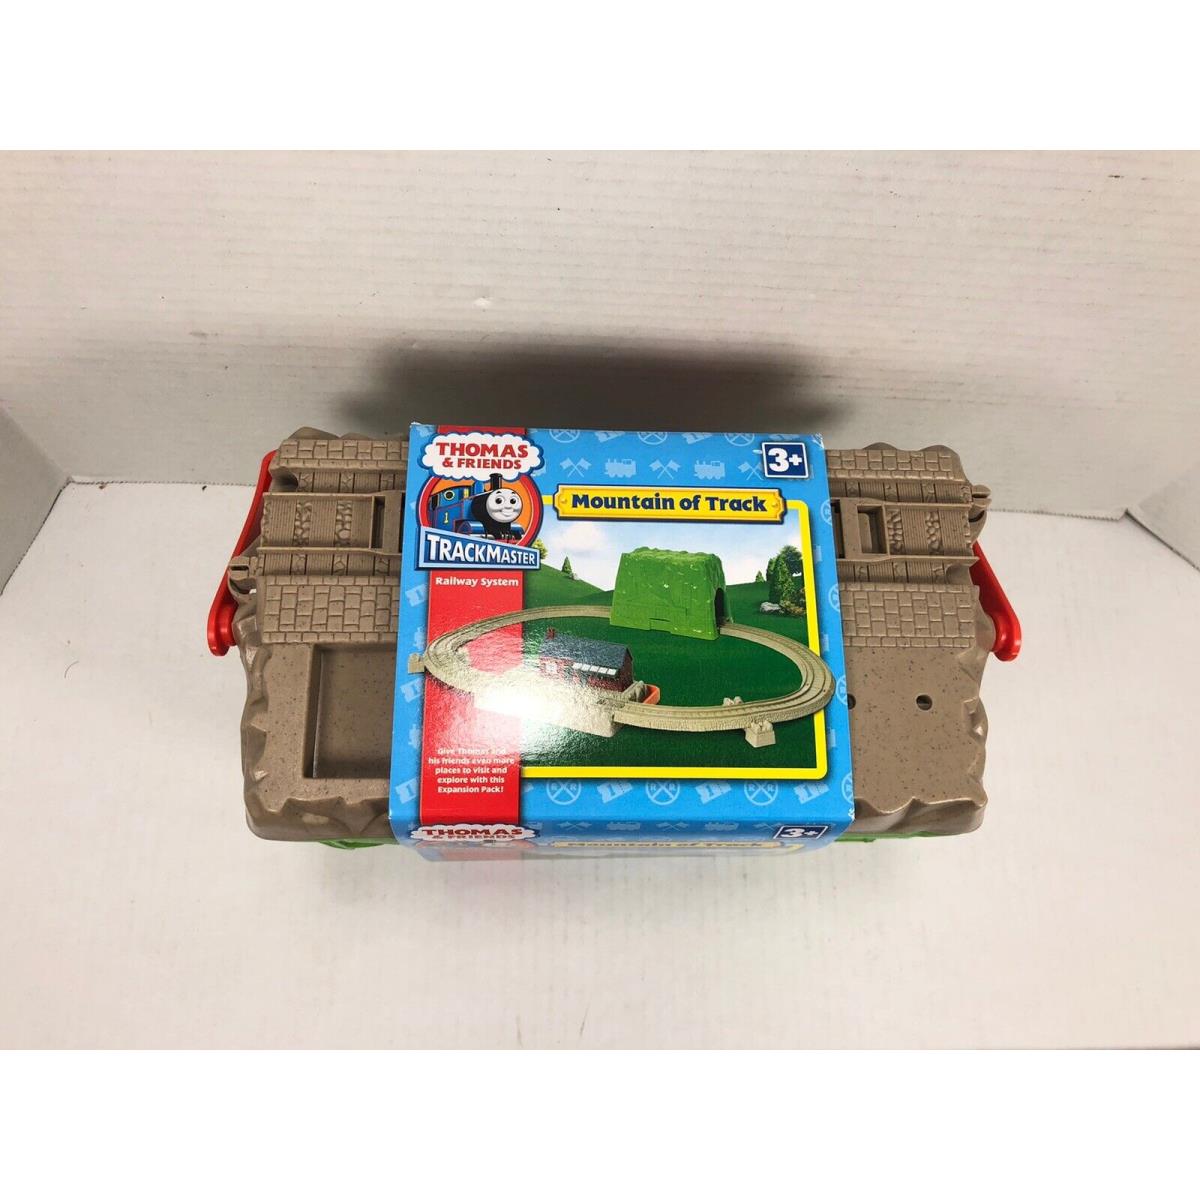 Thomas and Friends Trackmaster Mountain Of Track Railway System Plastic